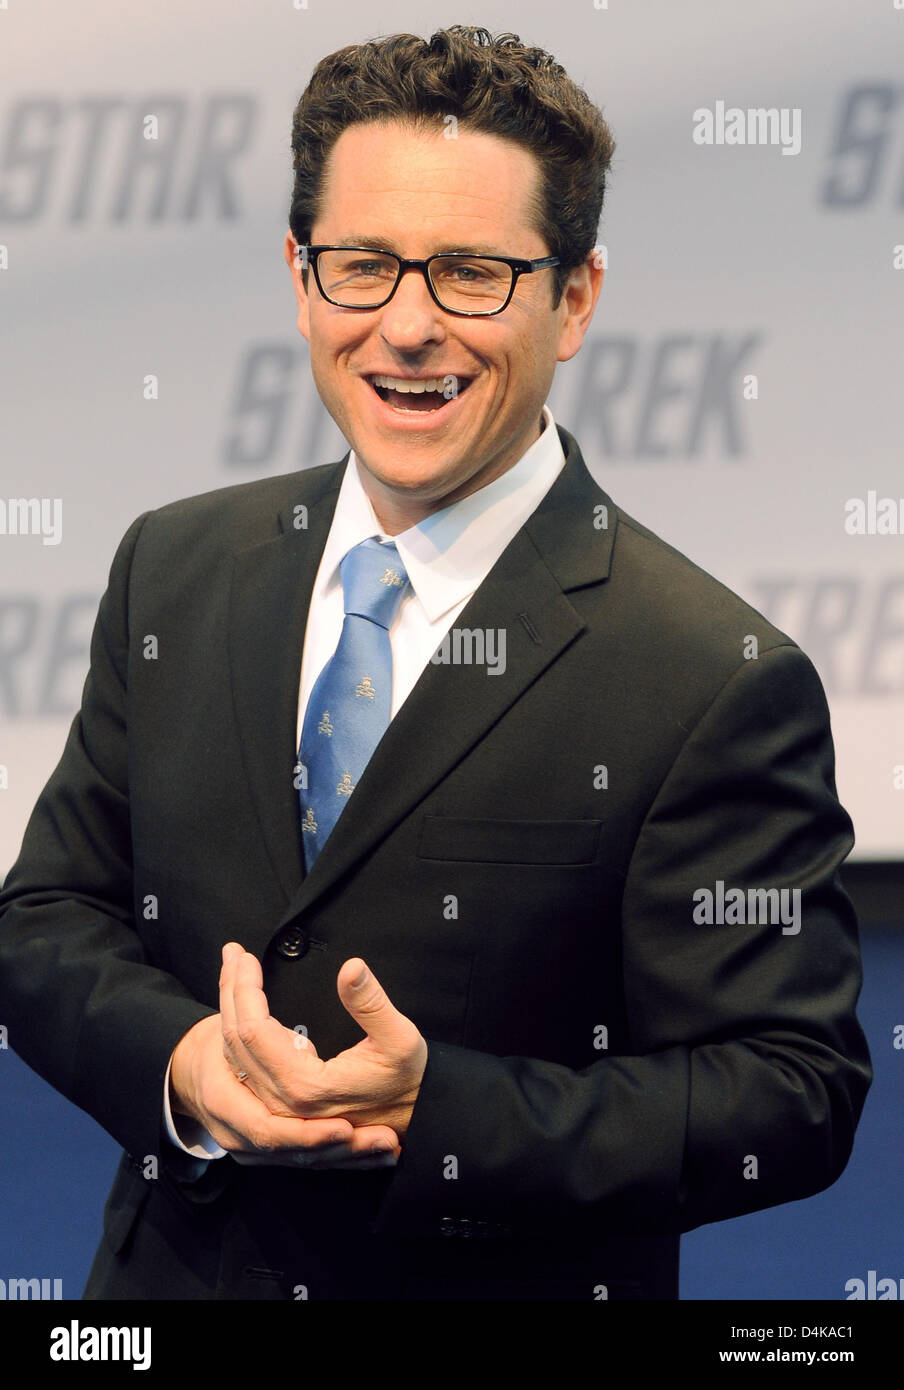 US director J.J. Abrams arrives for the Germany premiere of his film ?Star Trek? in Berlin, Germany, 16 April 2009. The new adventures of Captain Kirk will be in German cinemas from 07 May on. Photo: Jens Kalaene Stock Photo